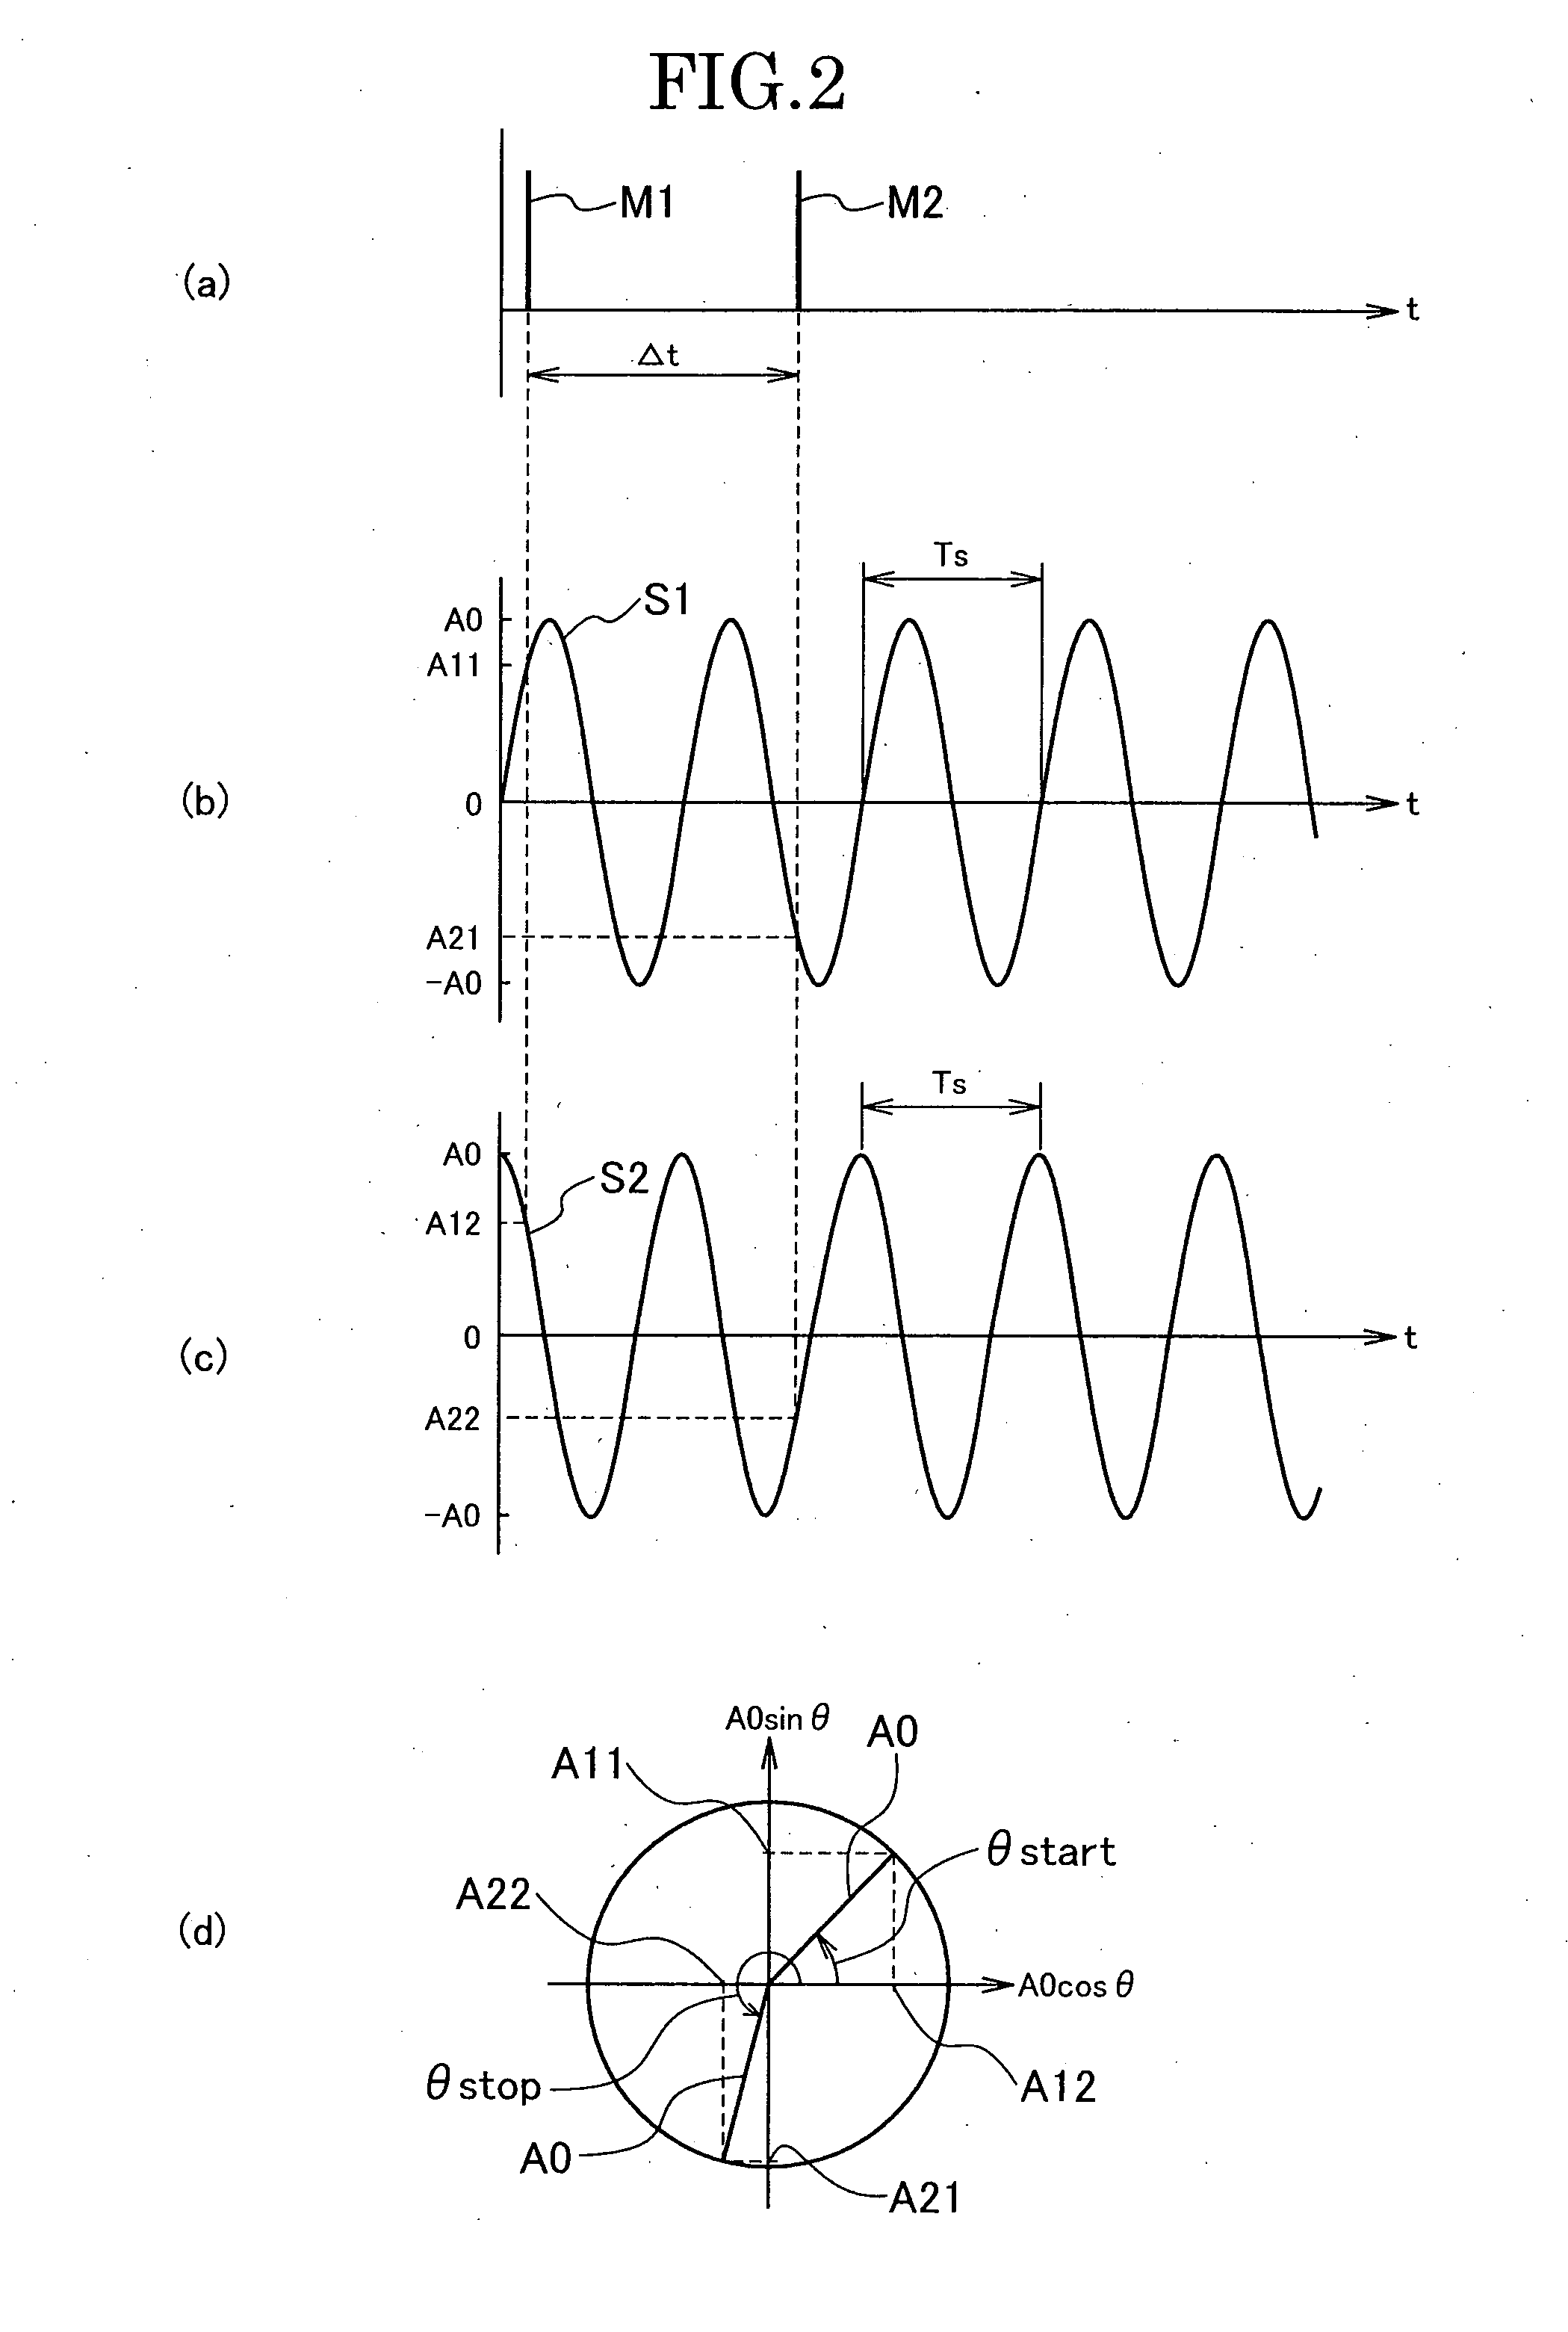 Time Difference Measuring Device, Measuring Method, Distance Measuring Device, and Distance Measuring Method